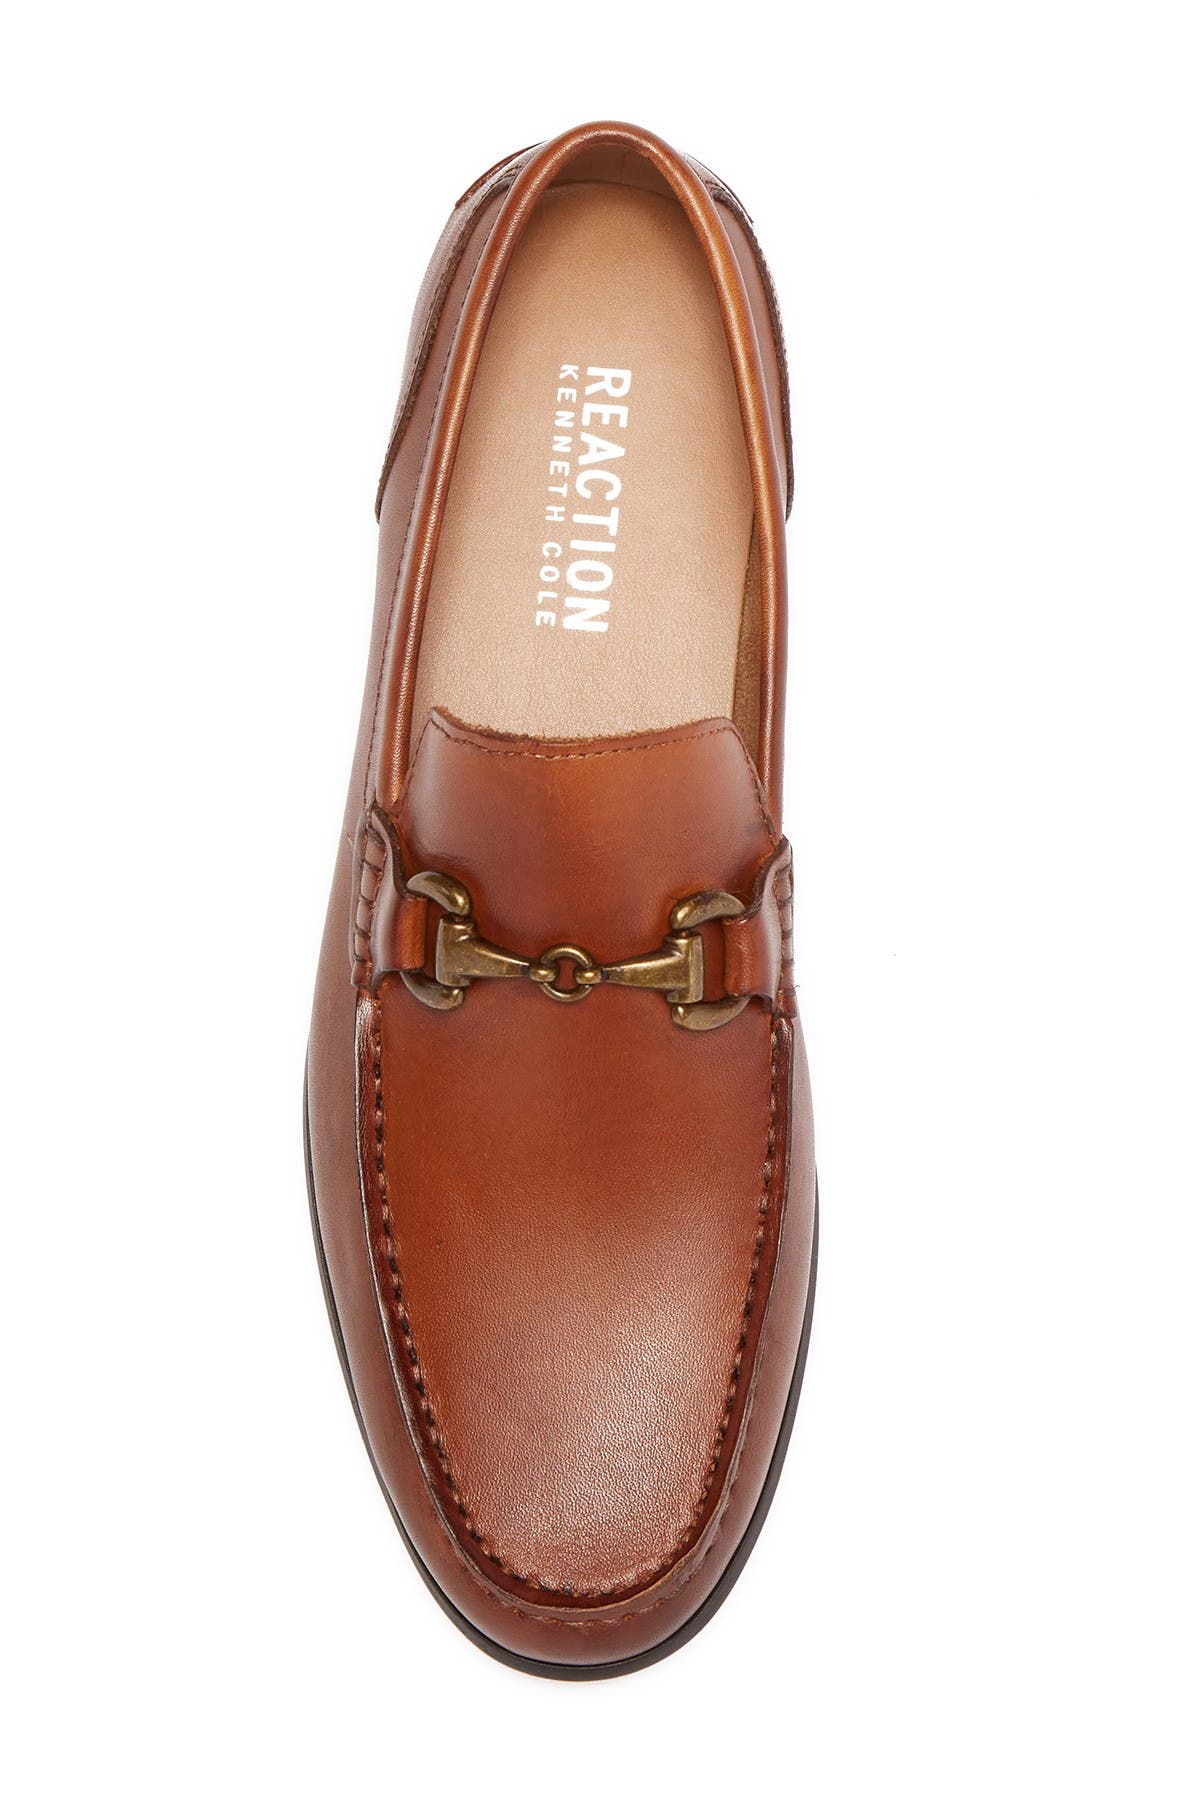 crespo loafer reaction kenneth cole